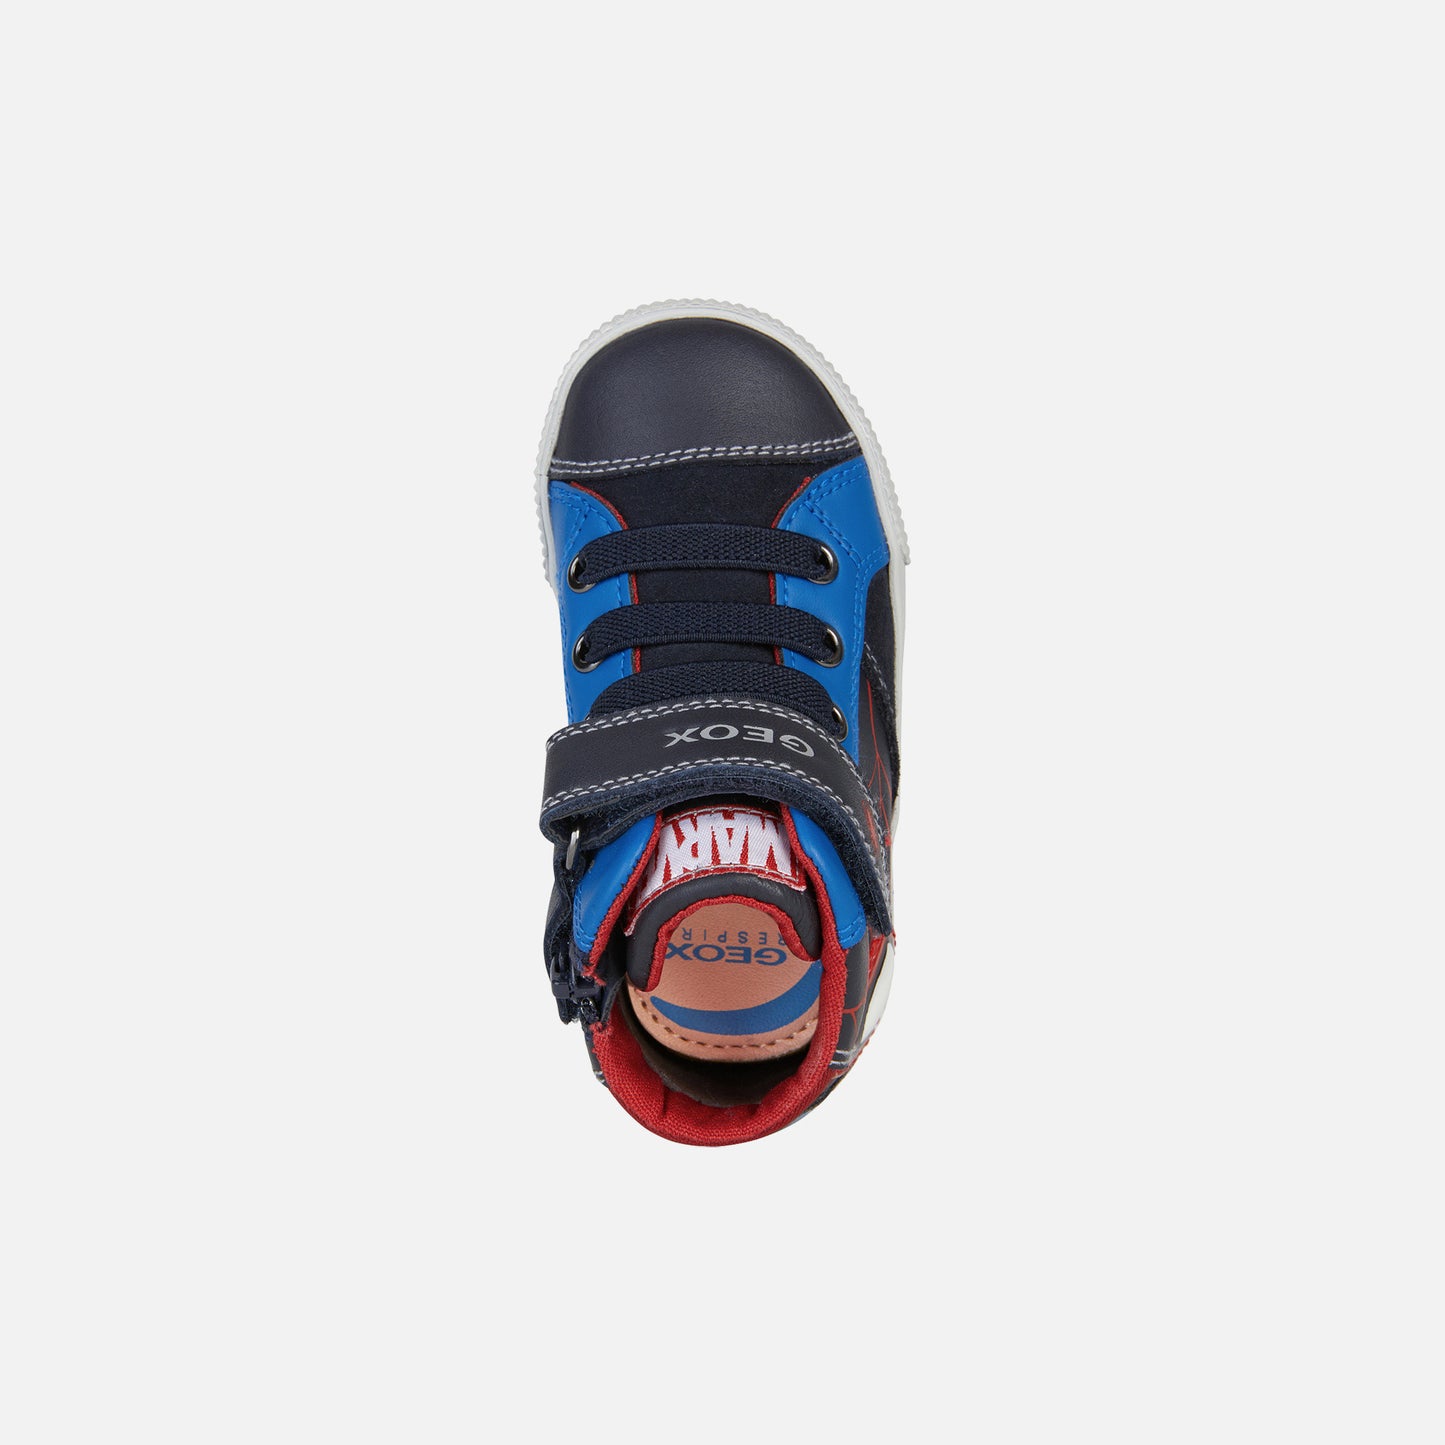 A boys Hi-Top trainer by Geox, style B Kilwi Boy Spiderman, in navy and royal, velcro and inside lace fastening. Top view.